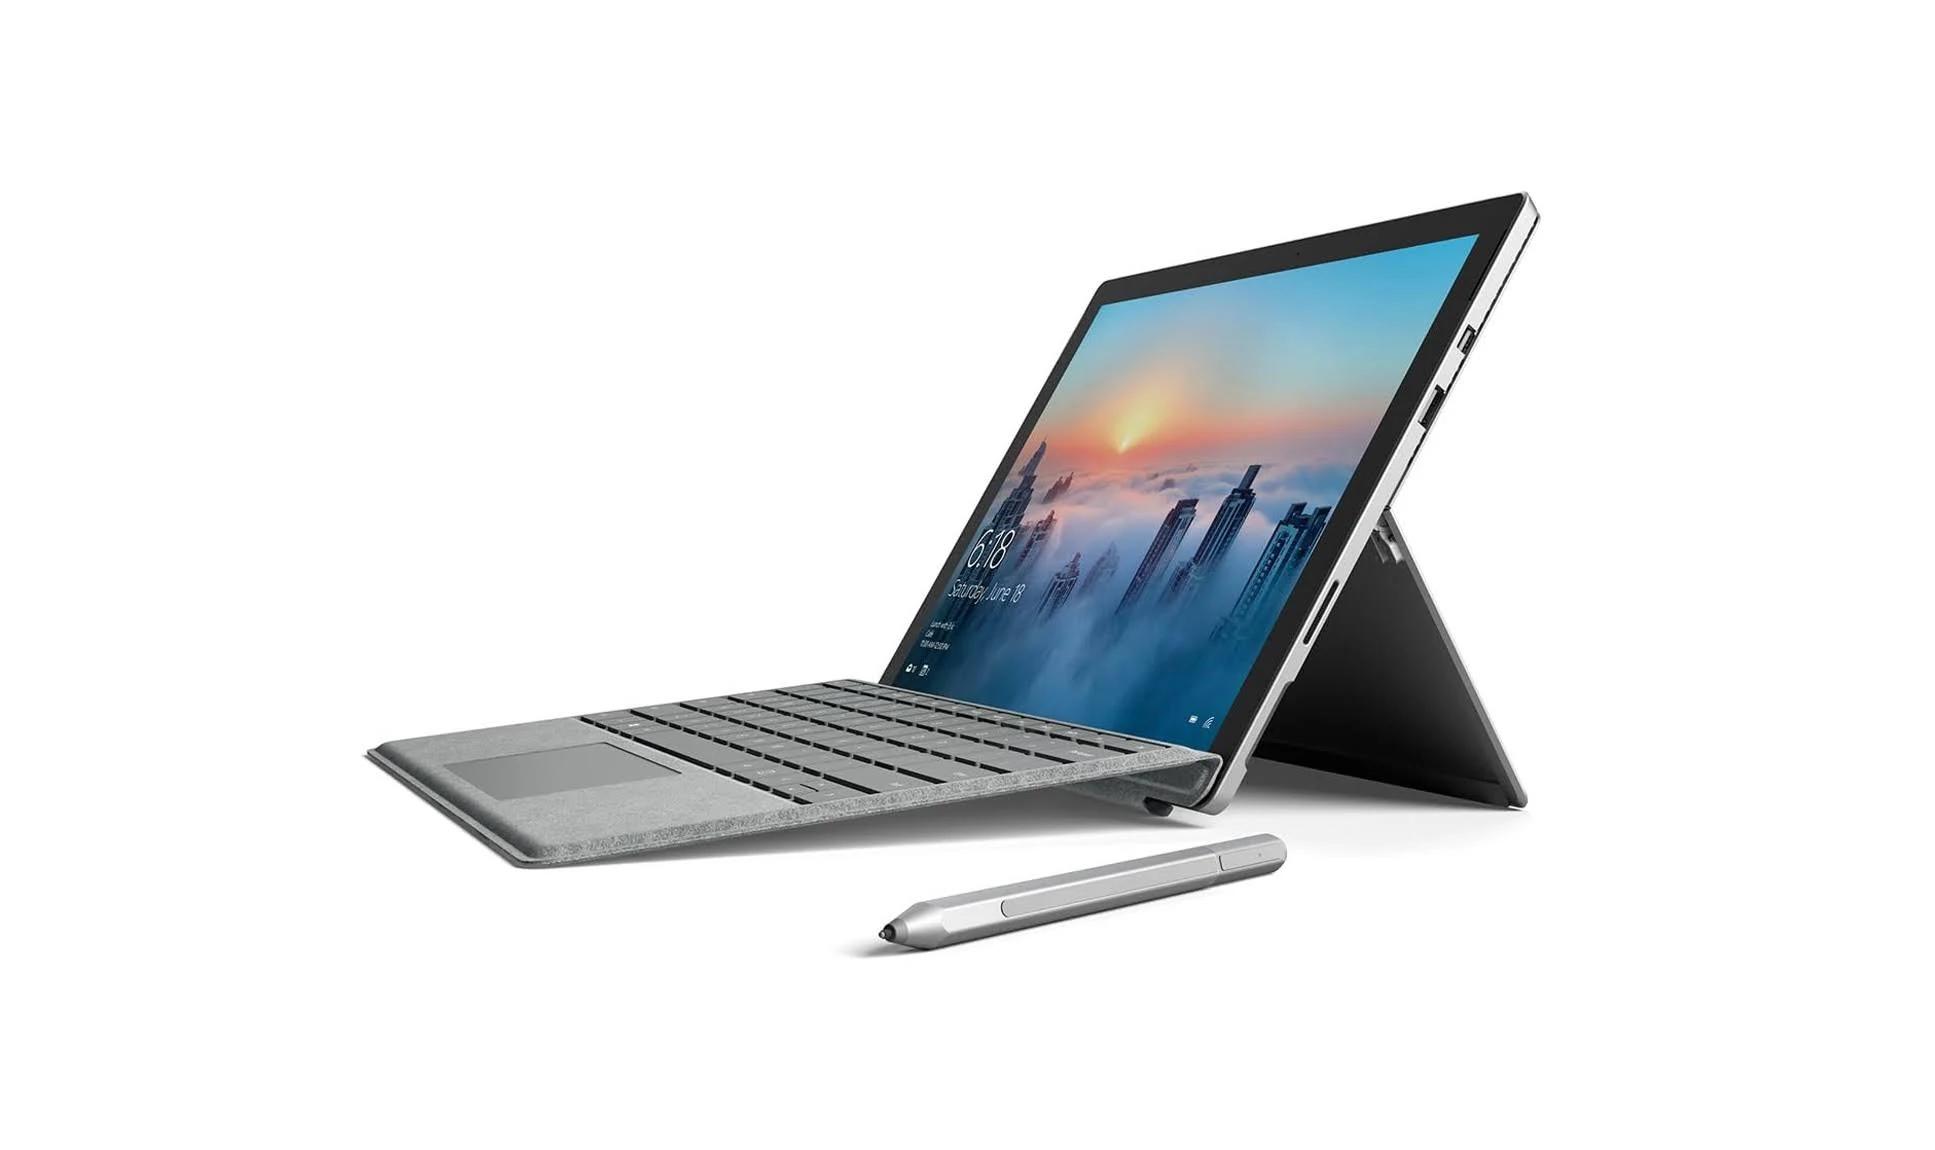 Pre-owned Microsoft Surface Pro 4 Without Keyboard - 12.3" - 2015 - Silver - PixelSense i5 2.4 GHz - 4 GB RAM - 128GB SSD